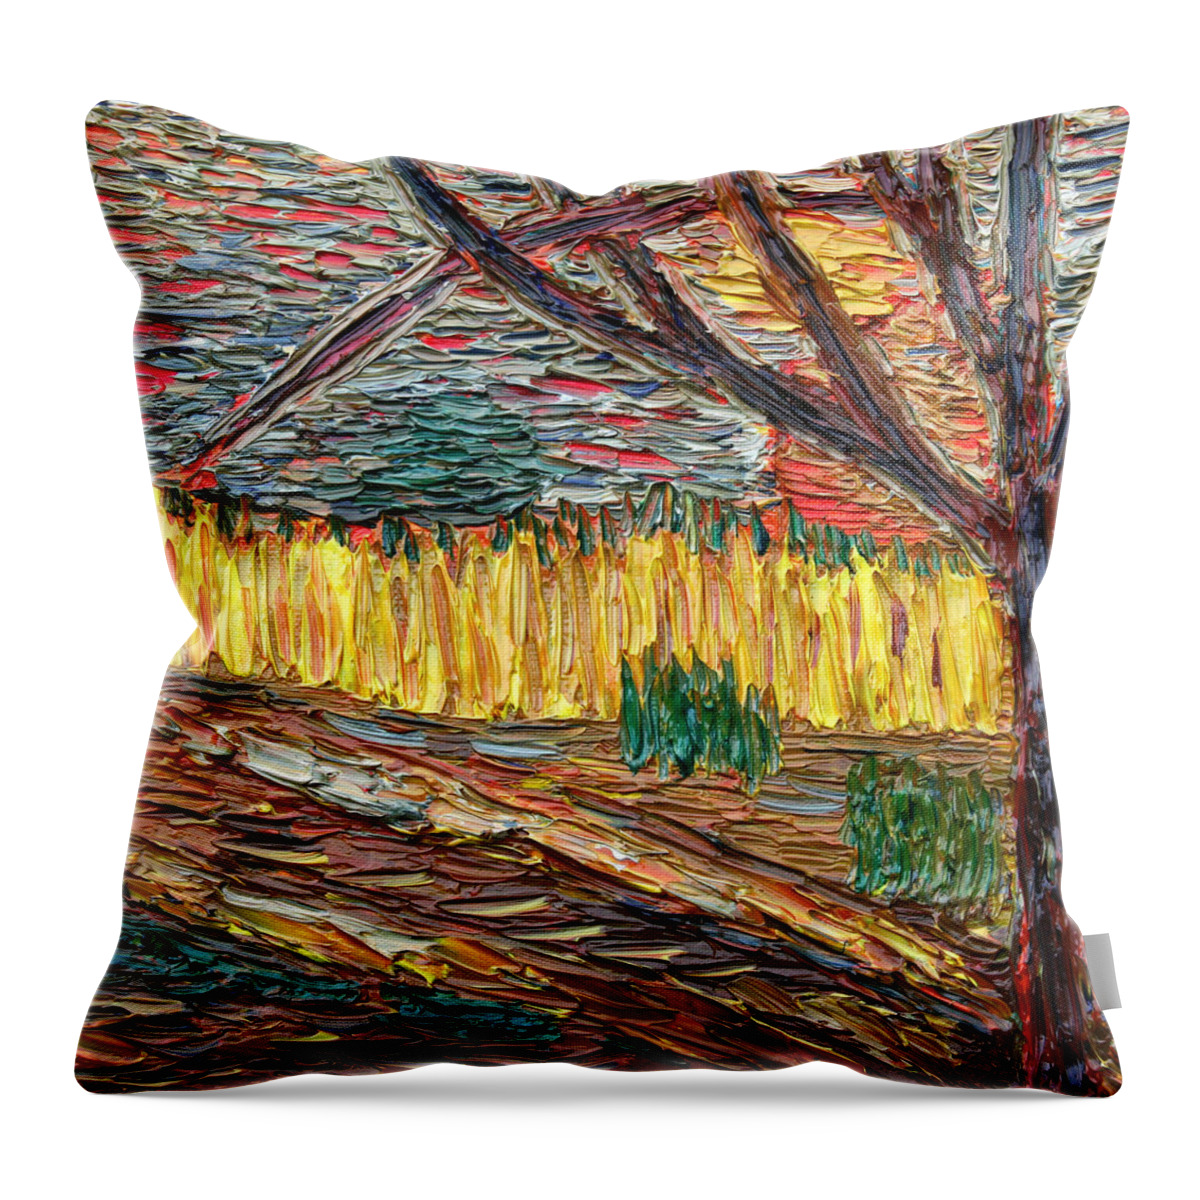 Inspiration Throw Pillow featuring the painting Hold the Thought Firmly... by Vadim Levin